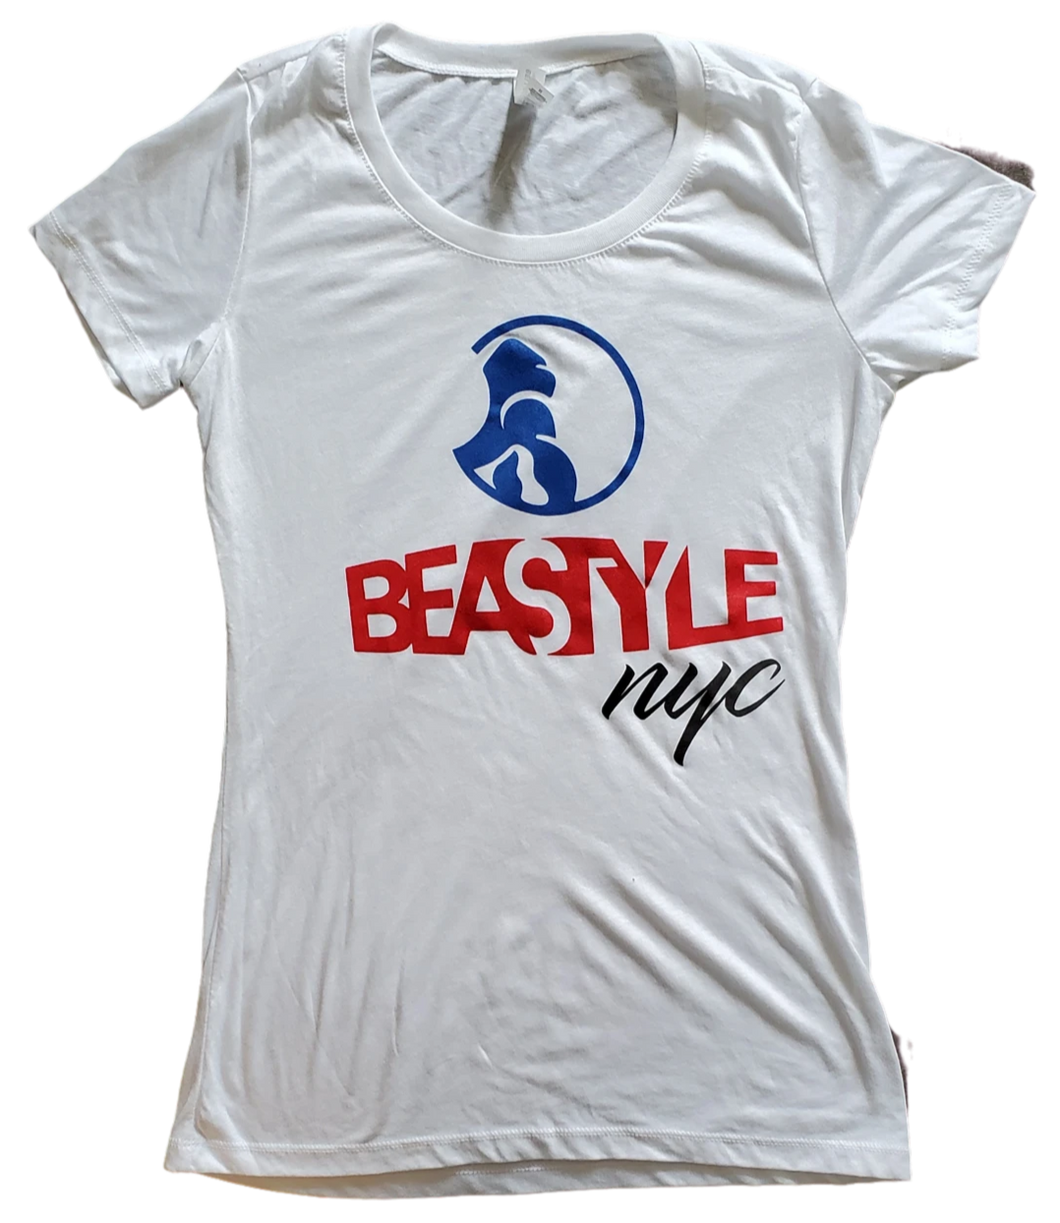 White Lady's Tee with Beastyle NYC Colored Graphic